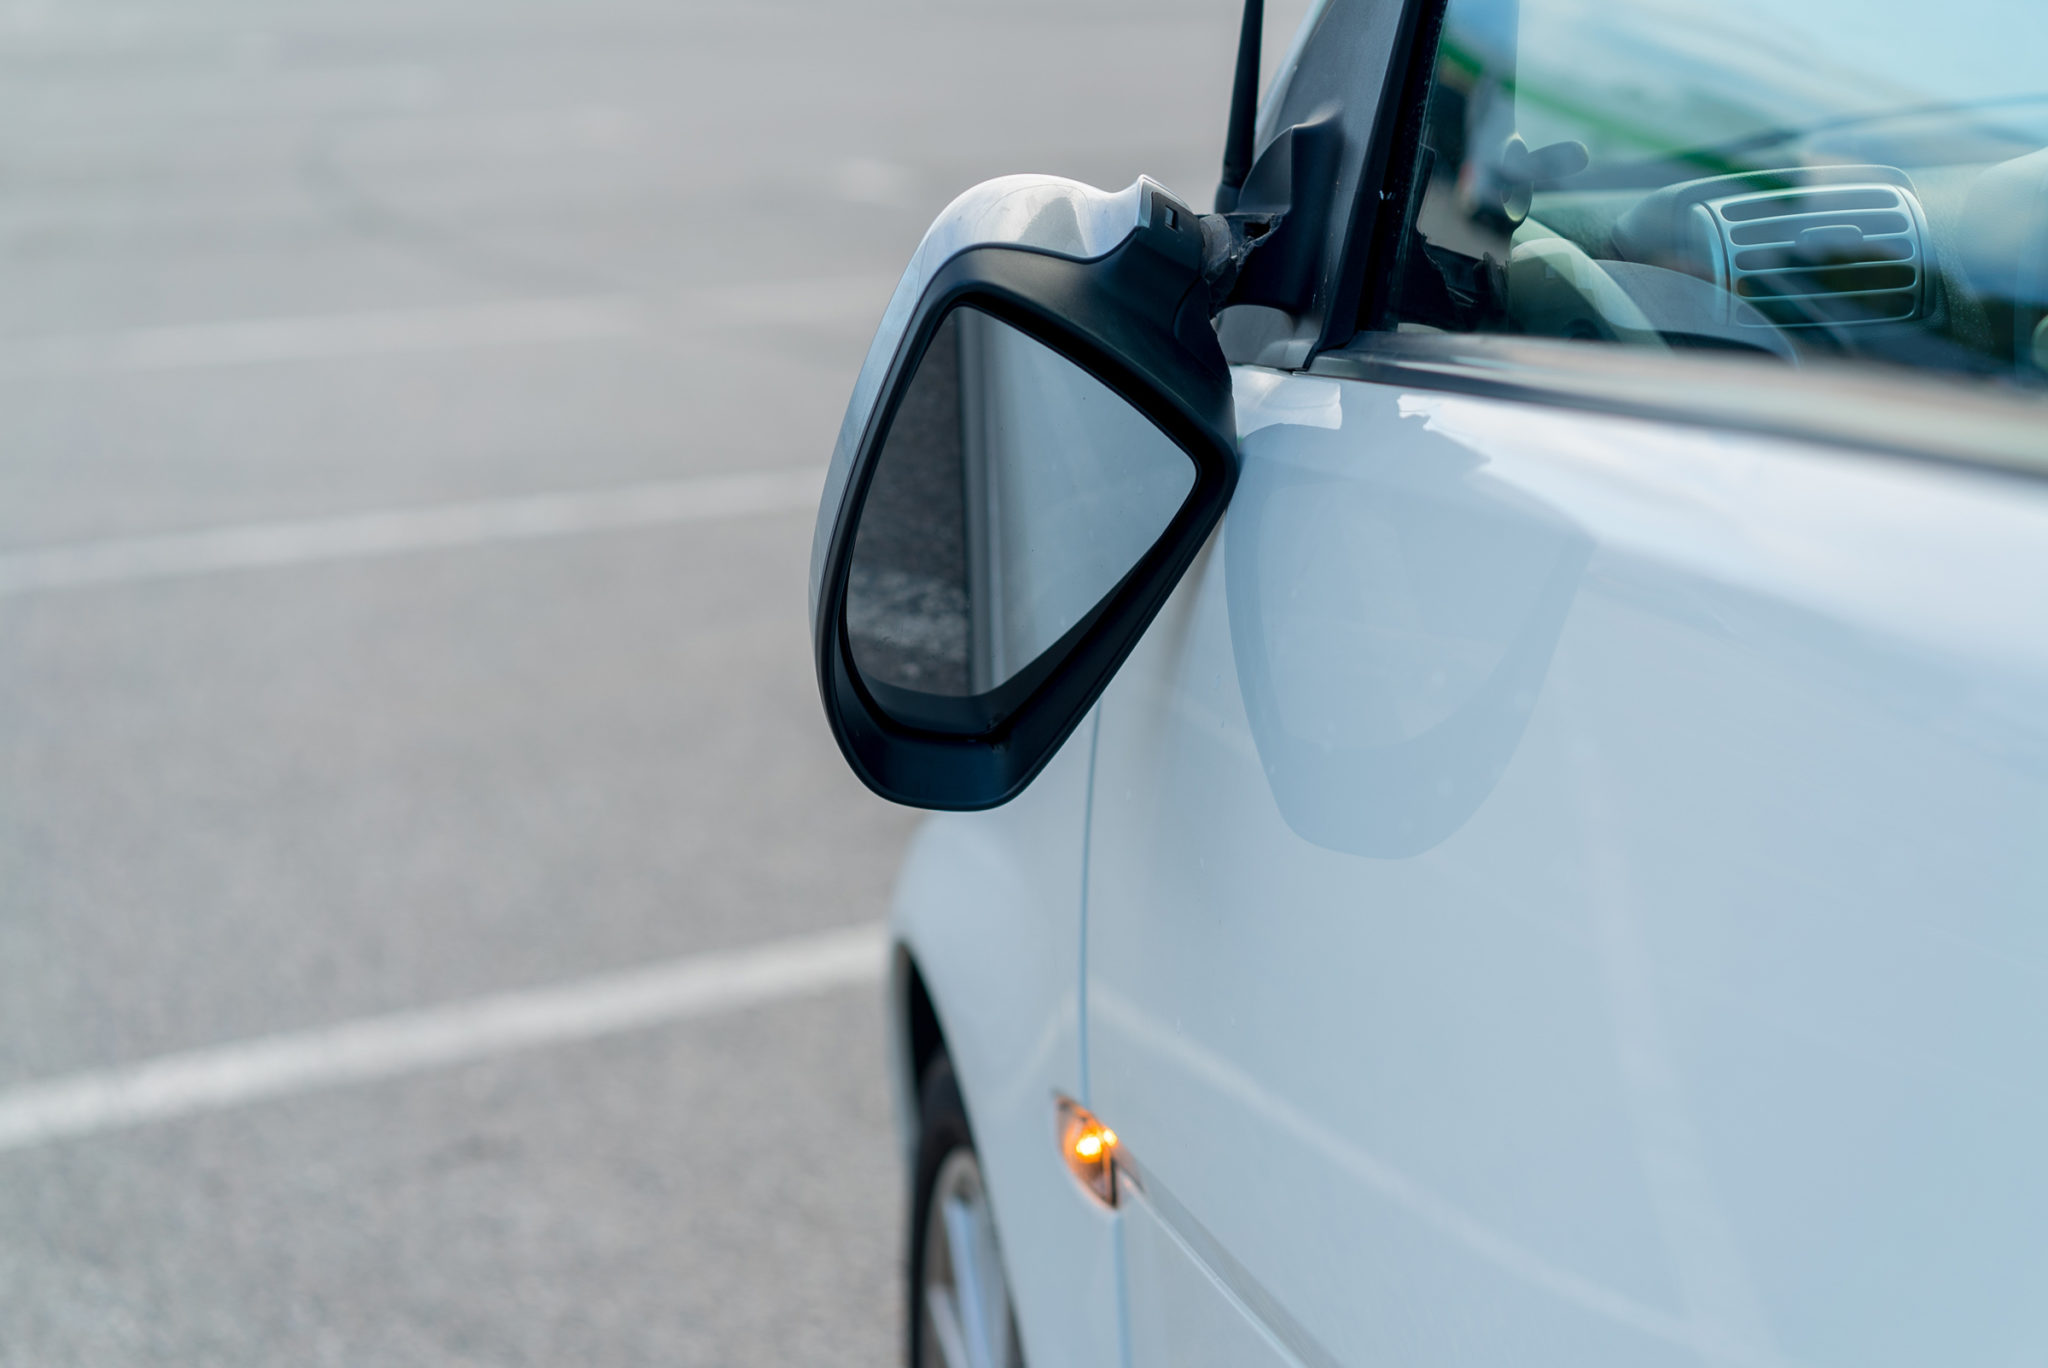 How To Reattach Side Mirror On Car